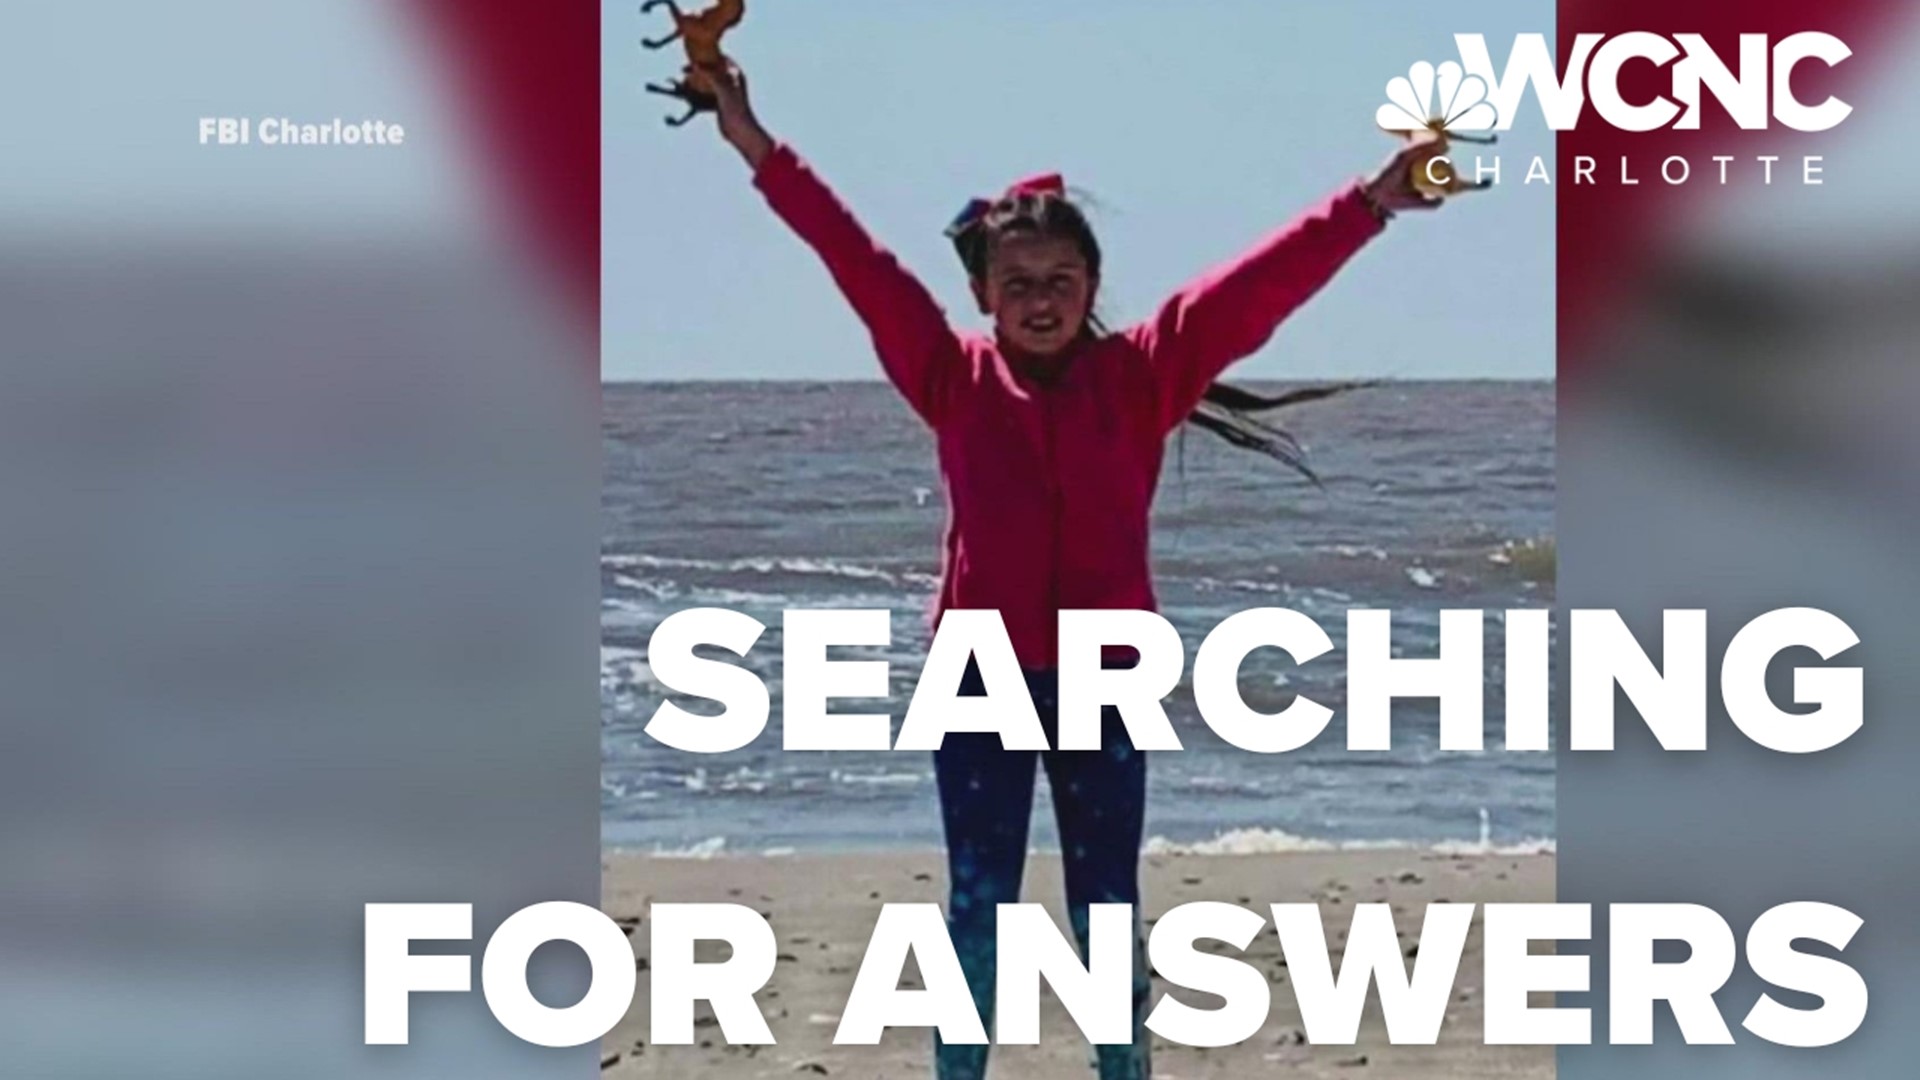 A forensic psychologist weighs in on the investigation into Madalina Cojocari's disappearance.